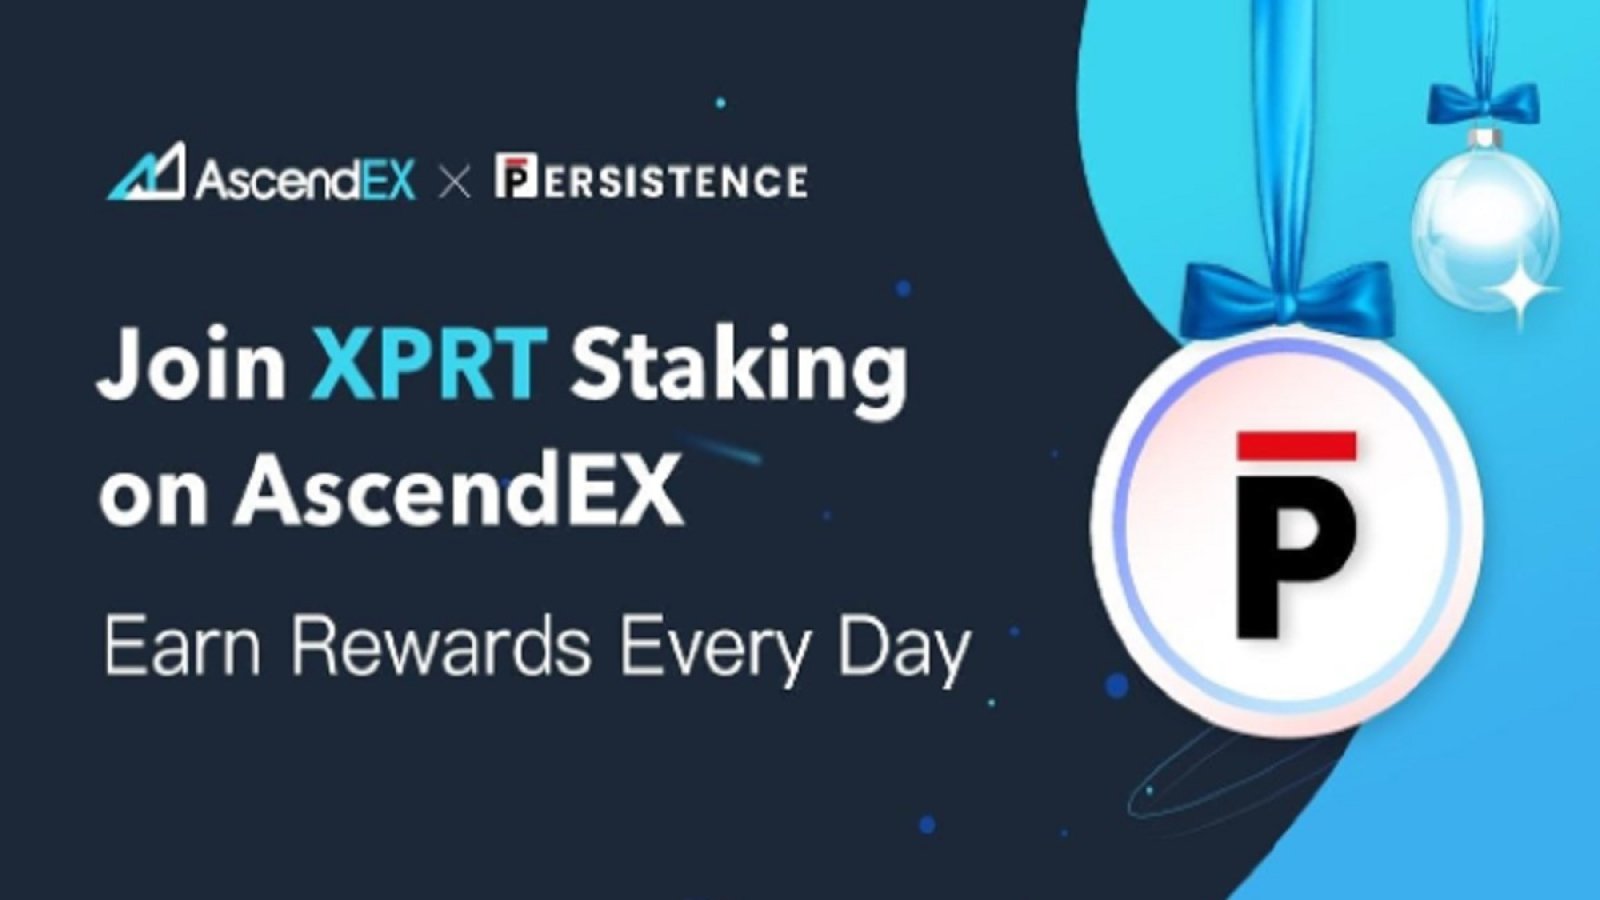 XPRT Staking on AscendEX